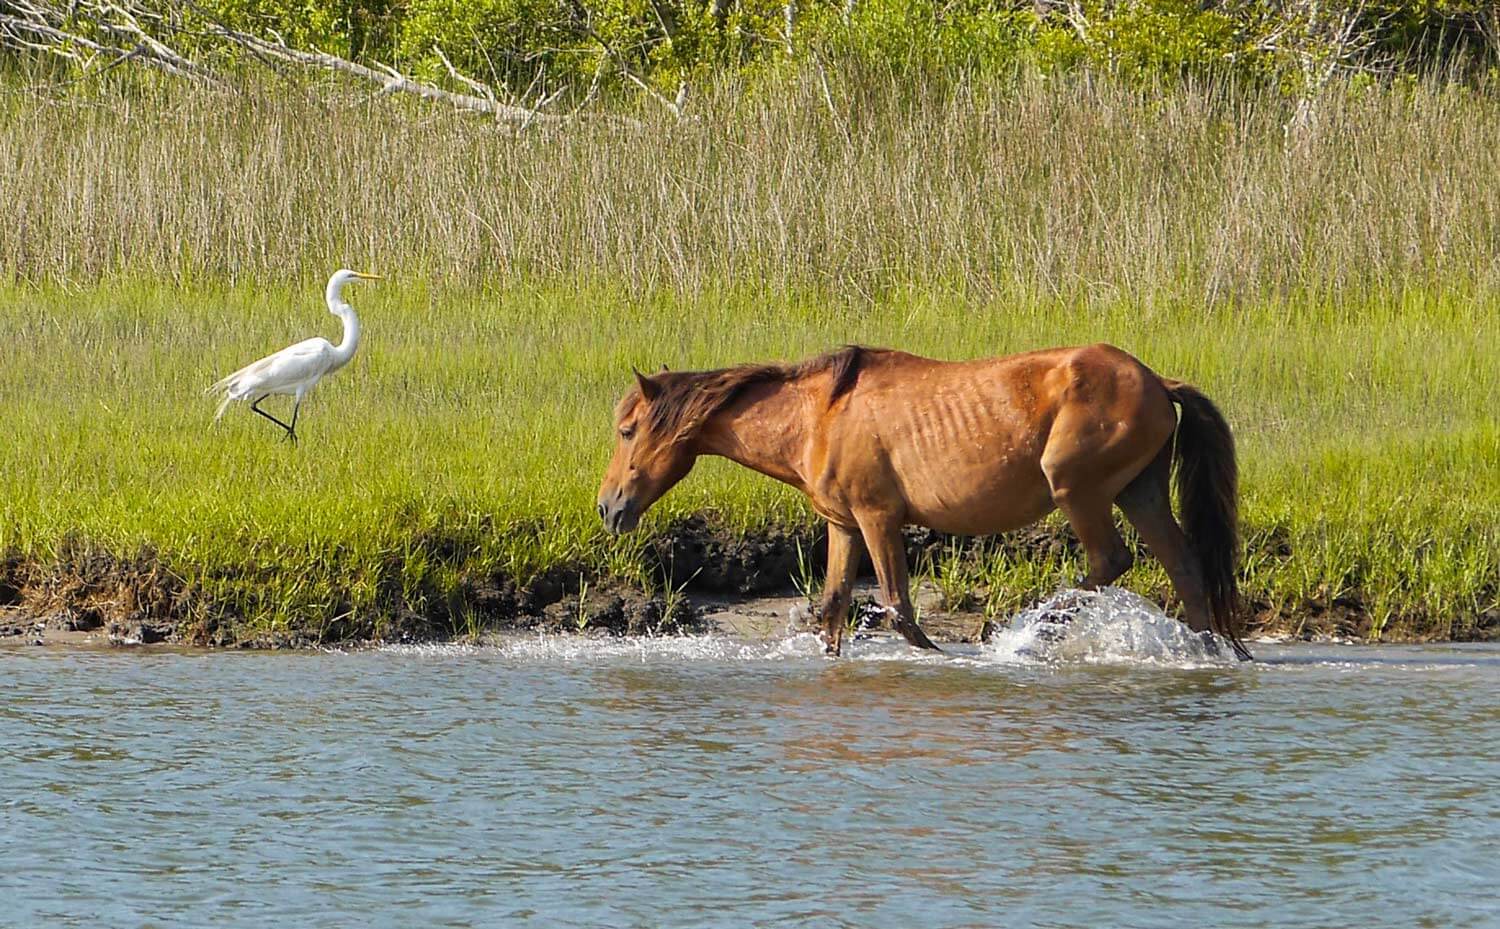 Wild horse and large water bird wading through the water alongside an anchorage in Beaufort, North Carolina